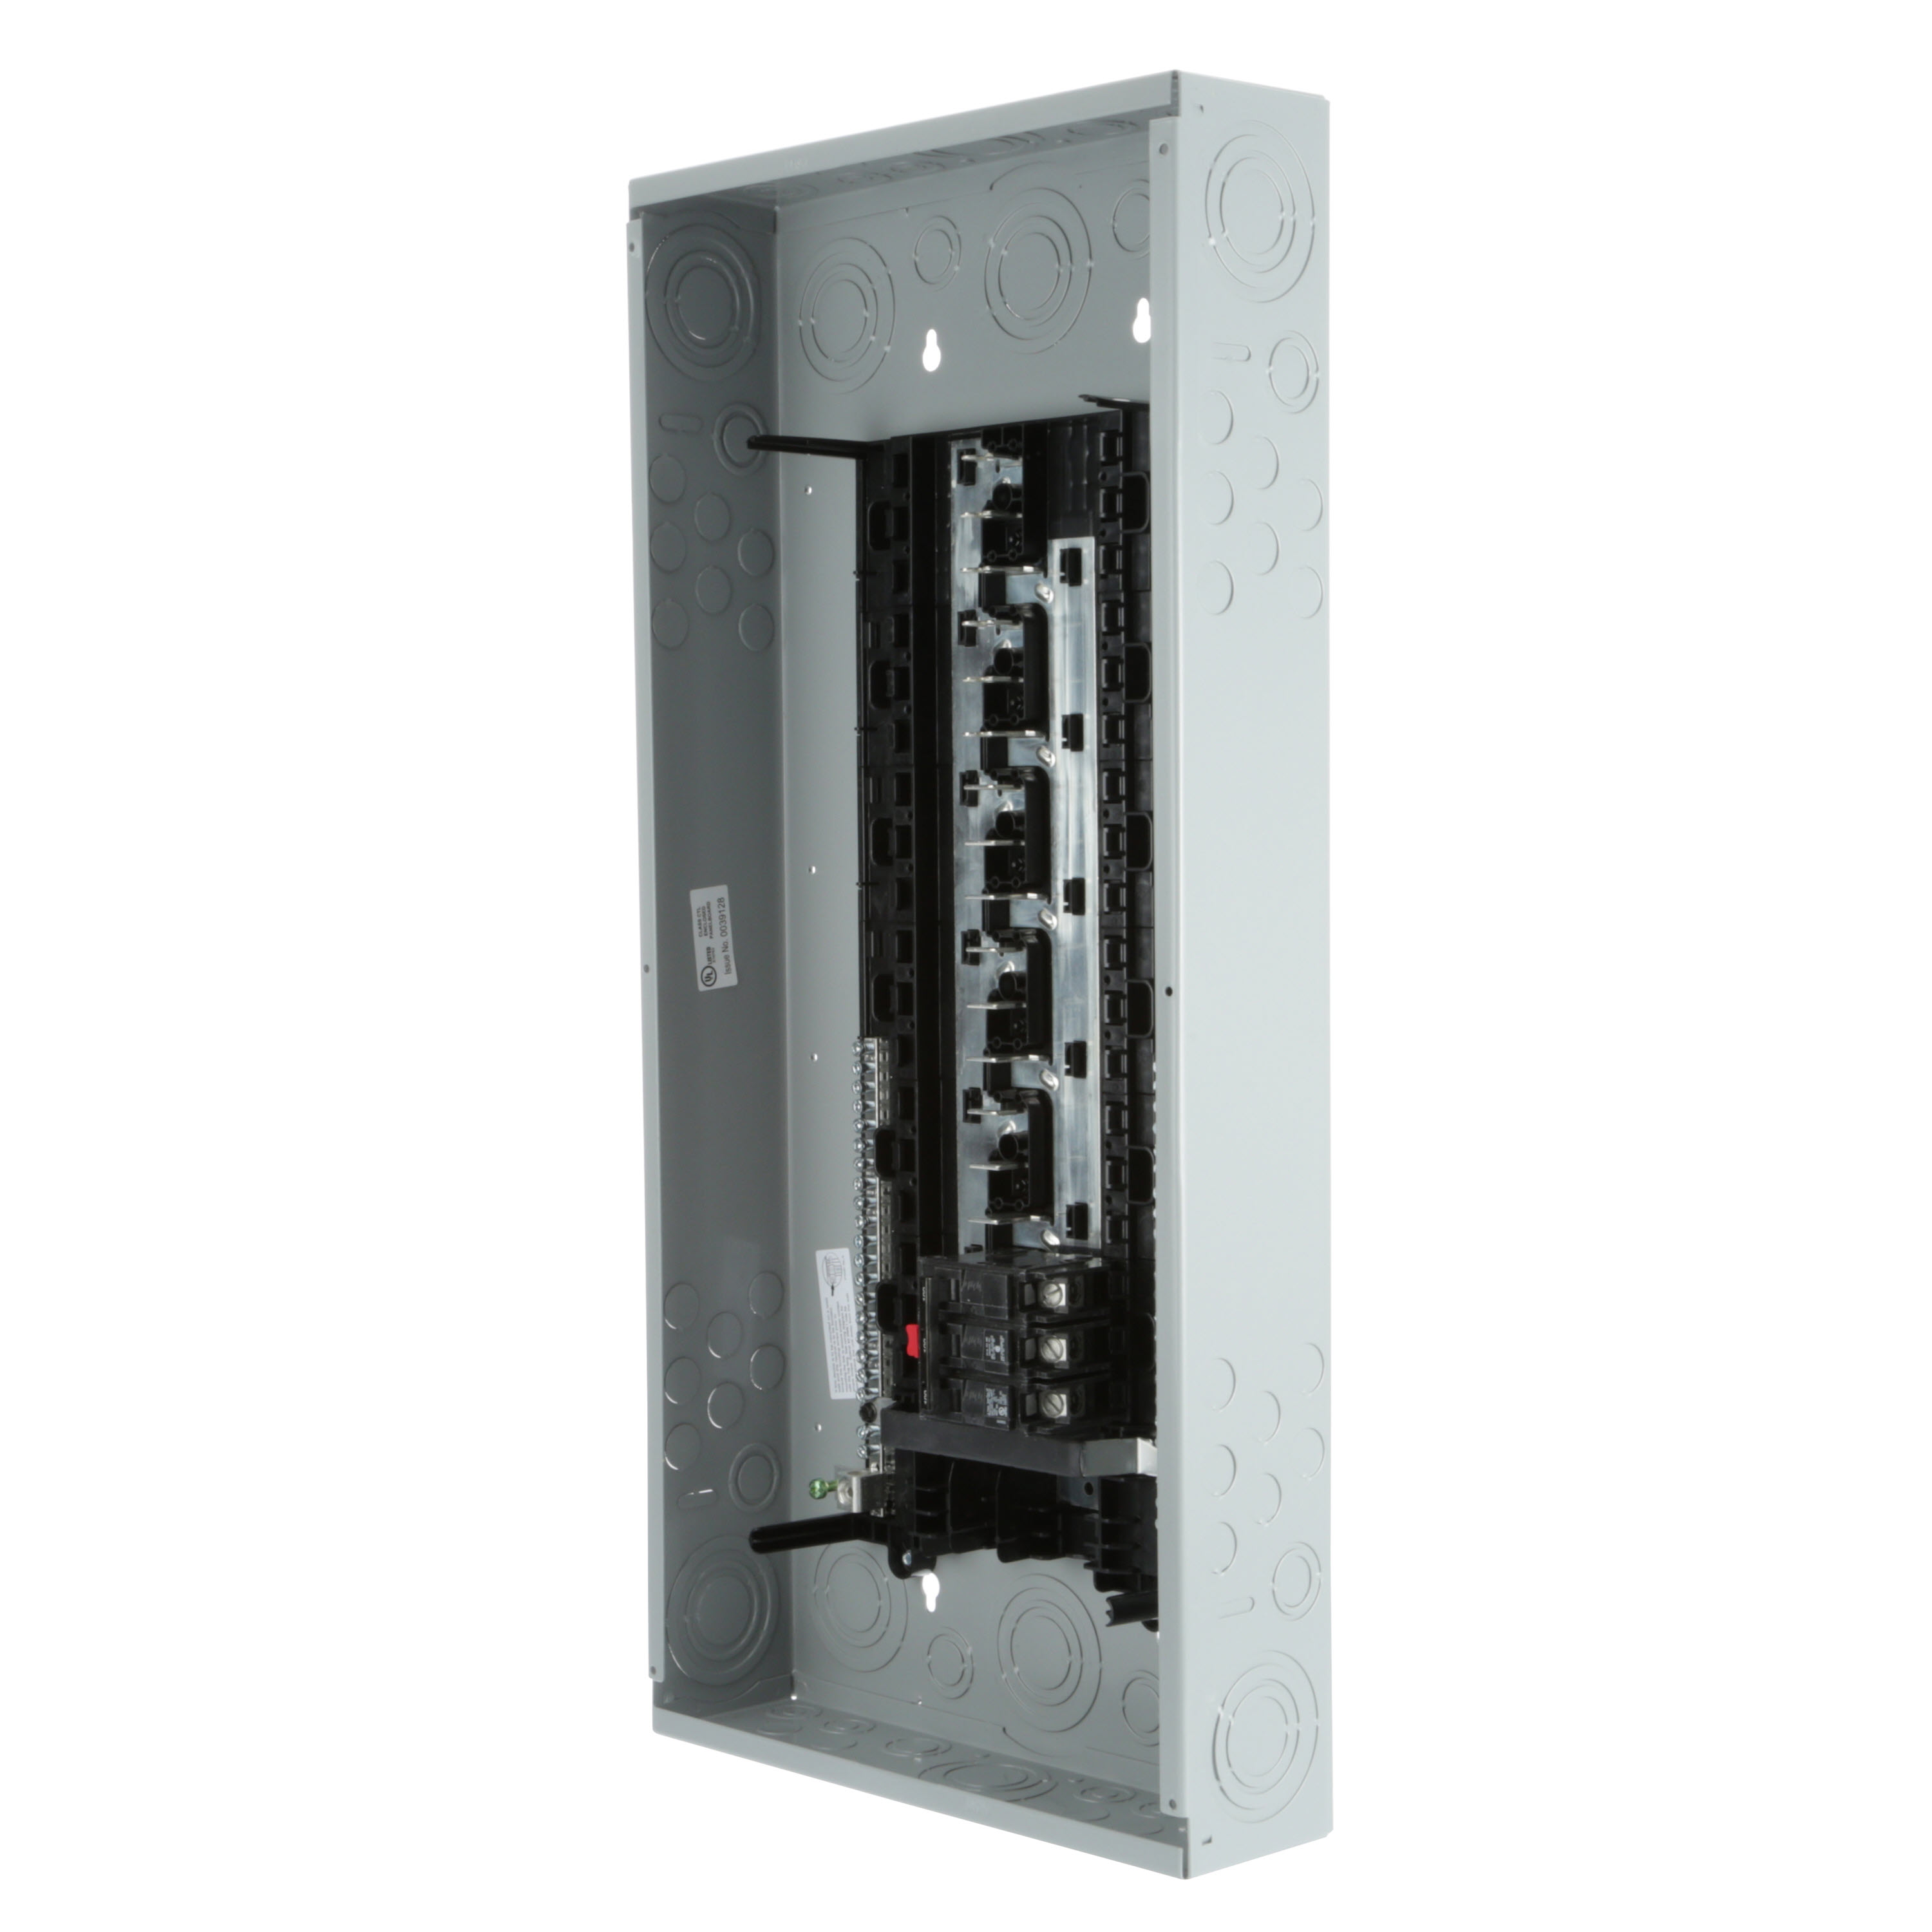 SIEMENS LOW VOLTAGE ES SERIES LOAD CENTER. FACTORY INSTALLED MAIN BREAKER WITH 30 1-INCH SPACES ALLOWING MAX 42 CIRCUITS. 3-PHASE 4-WIRE SYSTEM RATED 120/240V OR 120/208V (100A) 10KA INTERRUPT. SPECIAL FEATURES ALUMINUM BUS, GRAY TRIM, NEMA TYPE1 ENCLOSURE FOR INDOOR USE.